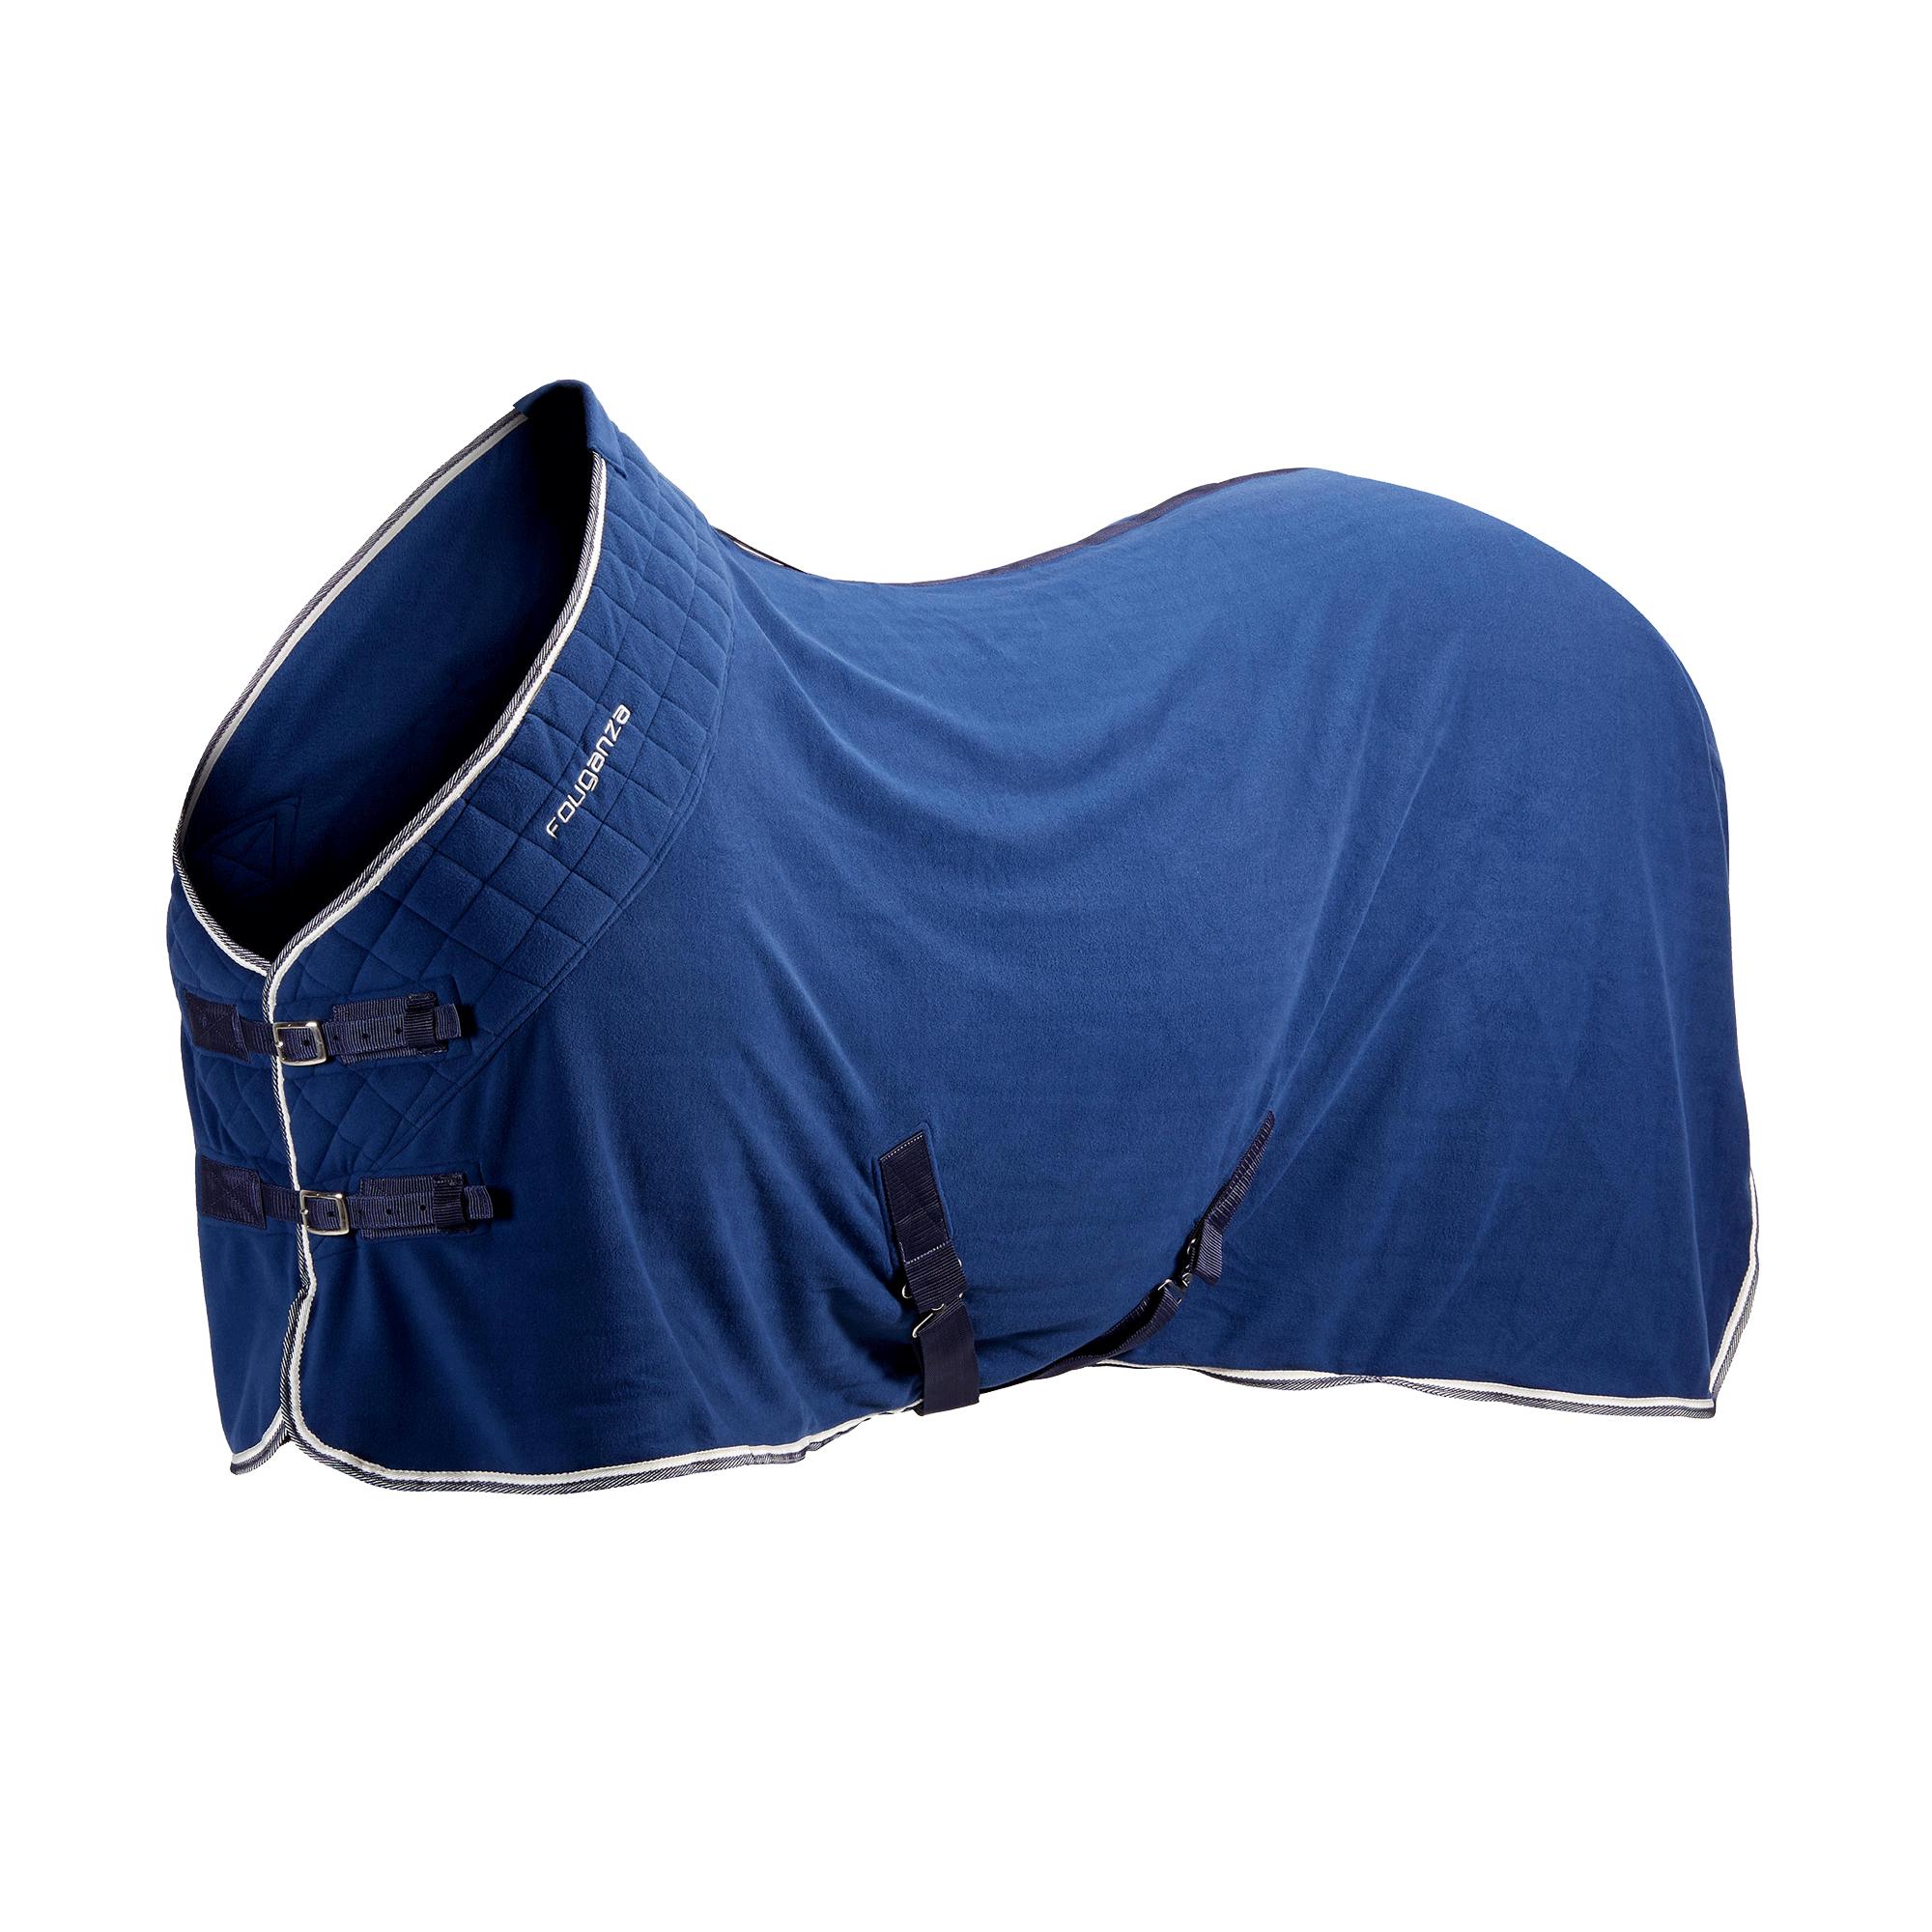 FOUGANZA Horse Riding Stable Sheet for Horse and Pony Polaire 500 - Blue